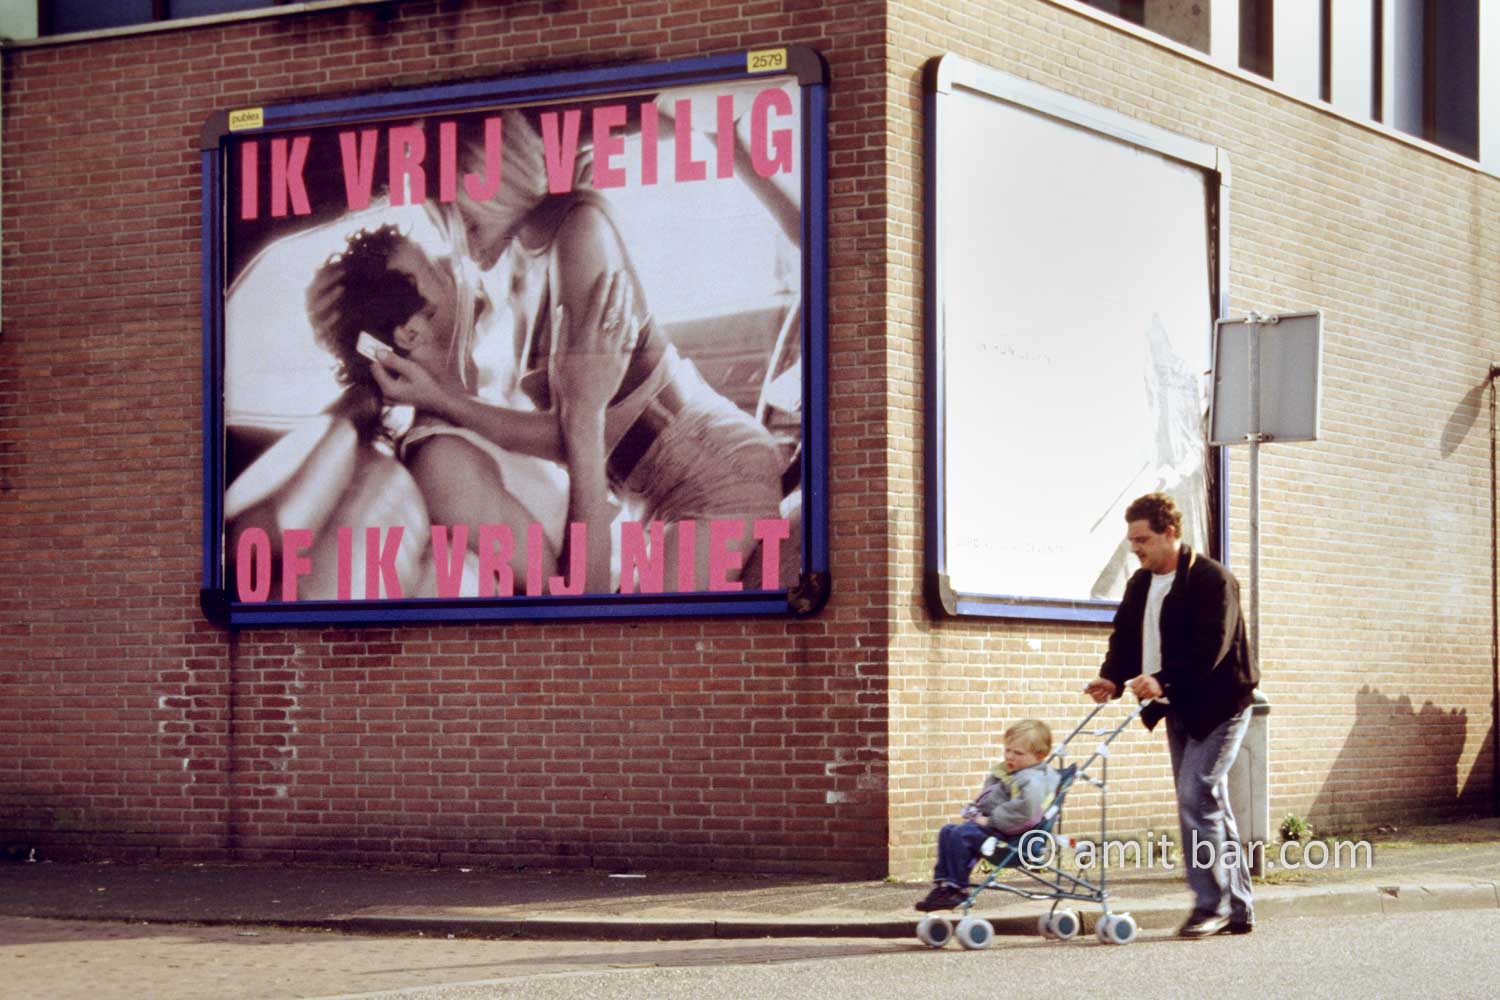 I make love safely, or I don't make love: A man with his toddler in a buggy is passing besides the billboard: "I make love safely, or I don't make love".